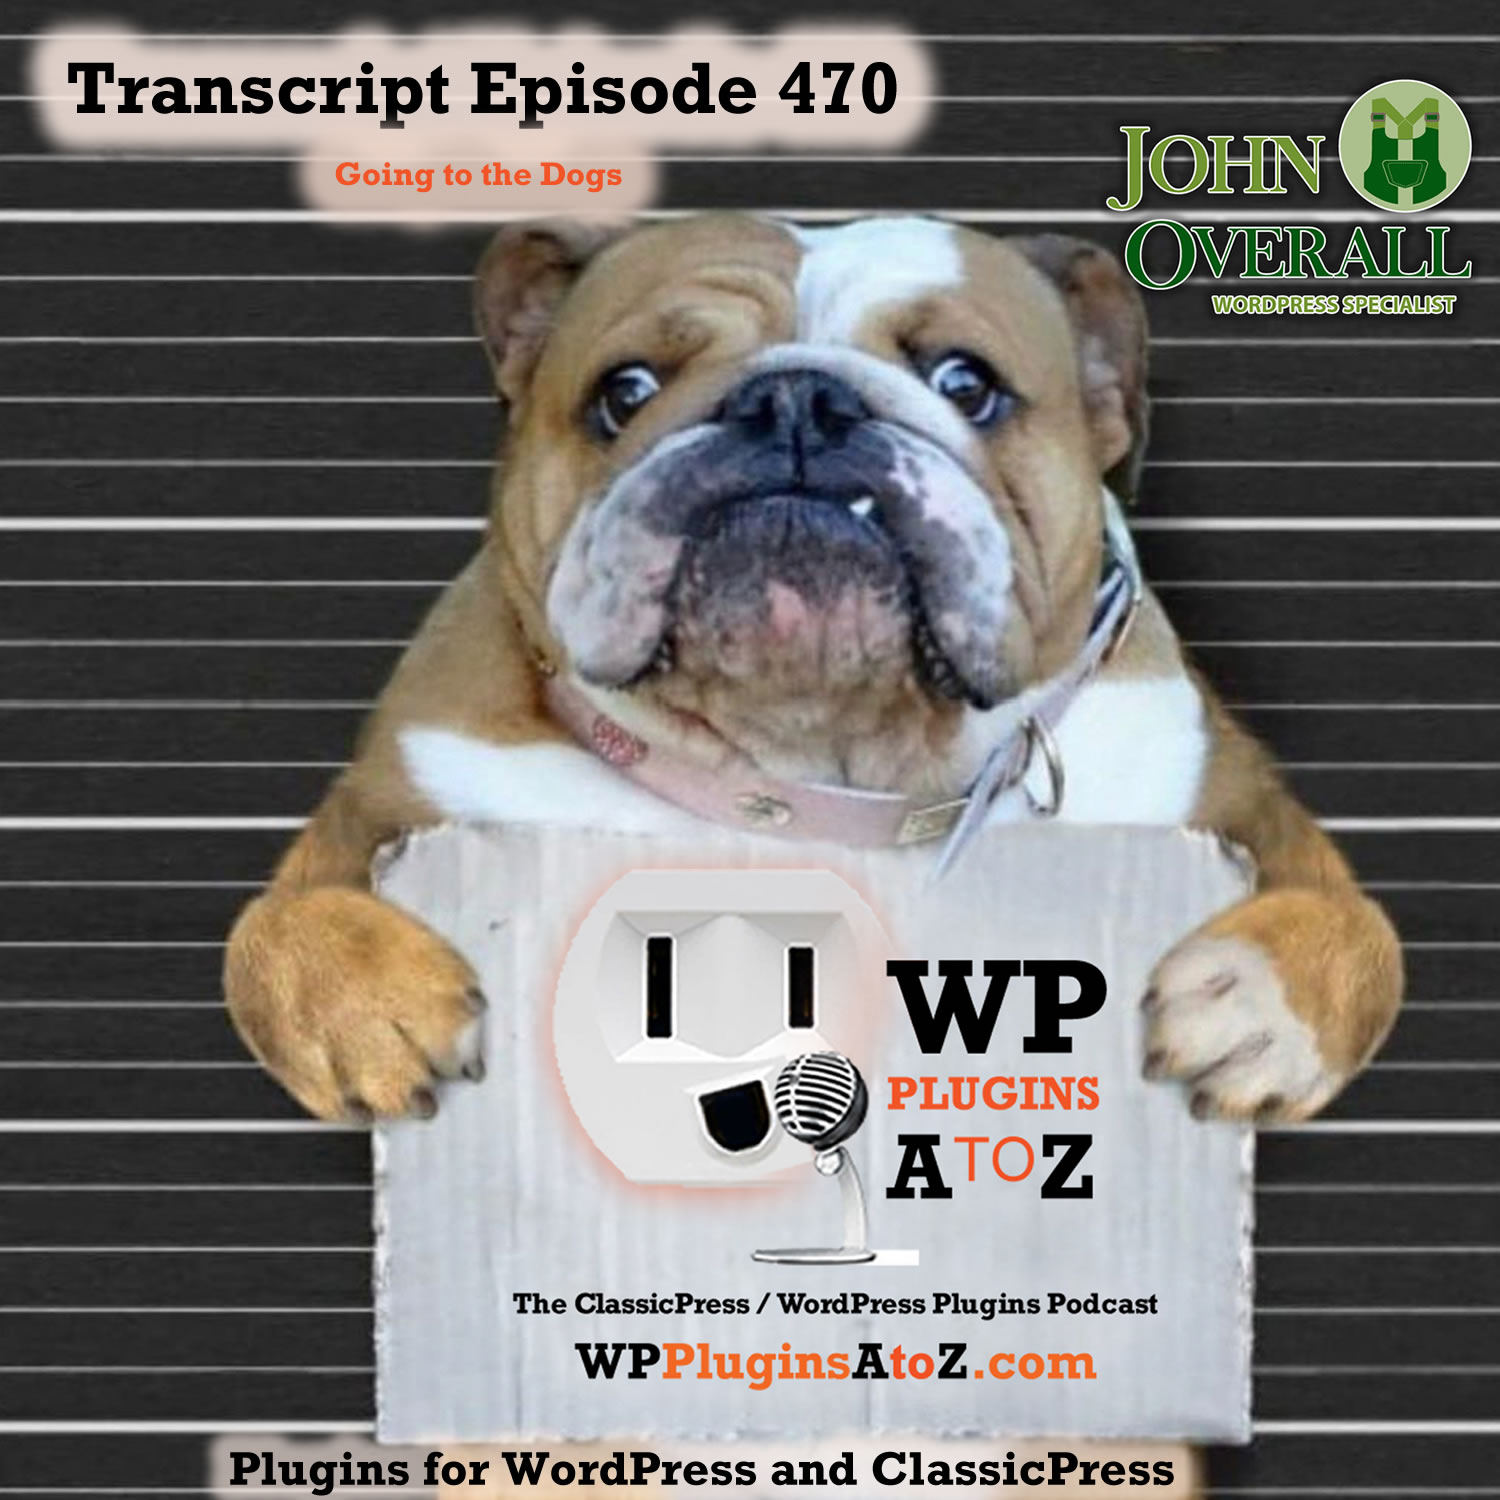 It's Episode 470 with plugins for Singing the Blues, User Roles, SPRM Menus, Affiliate Life, Galleries and ClassicPress Options. It's all coming up on WordPress Plugins A-Z!